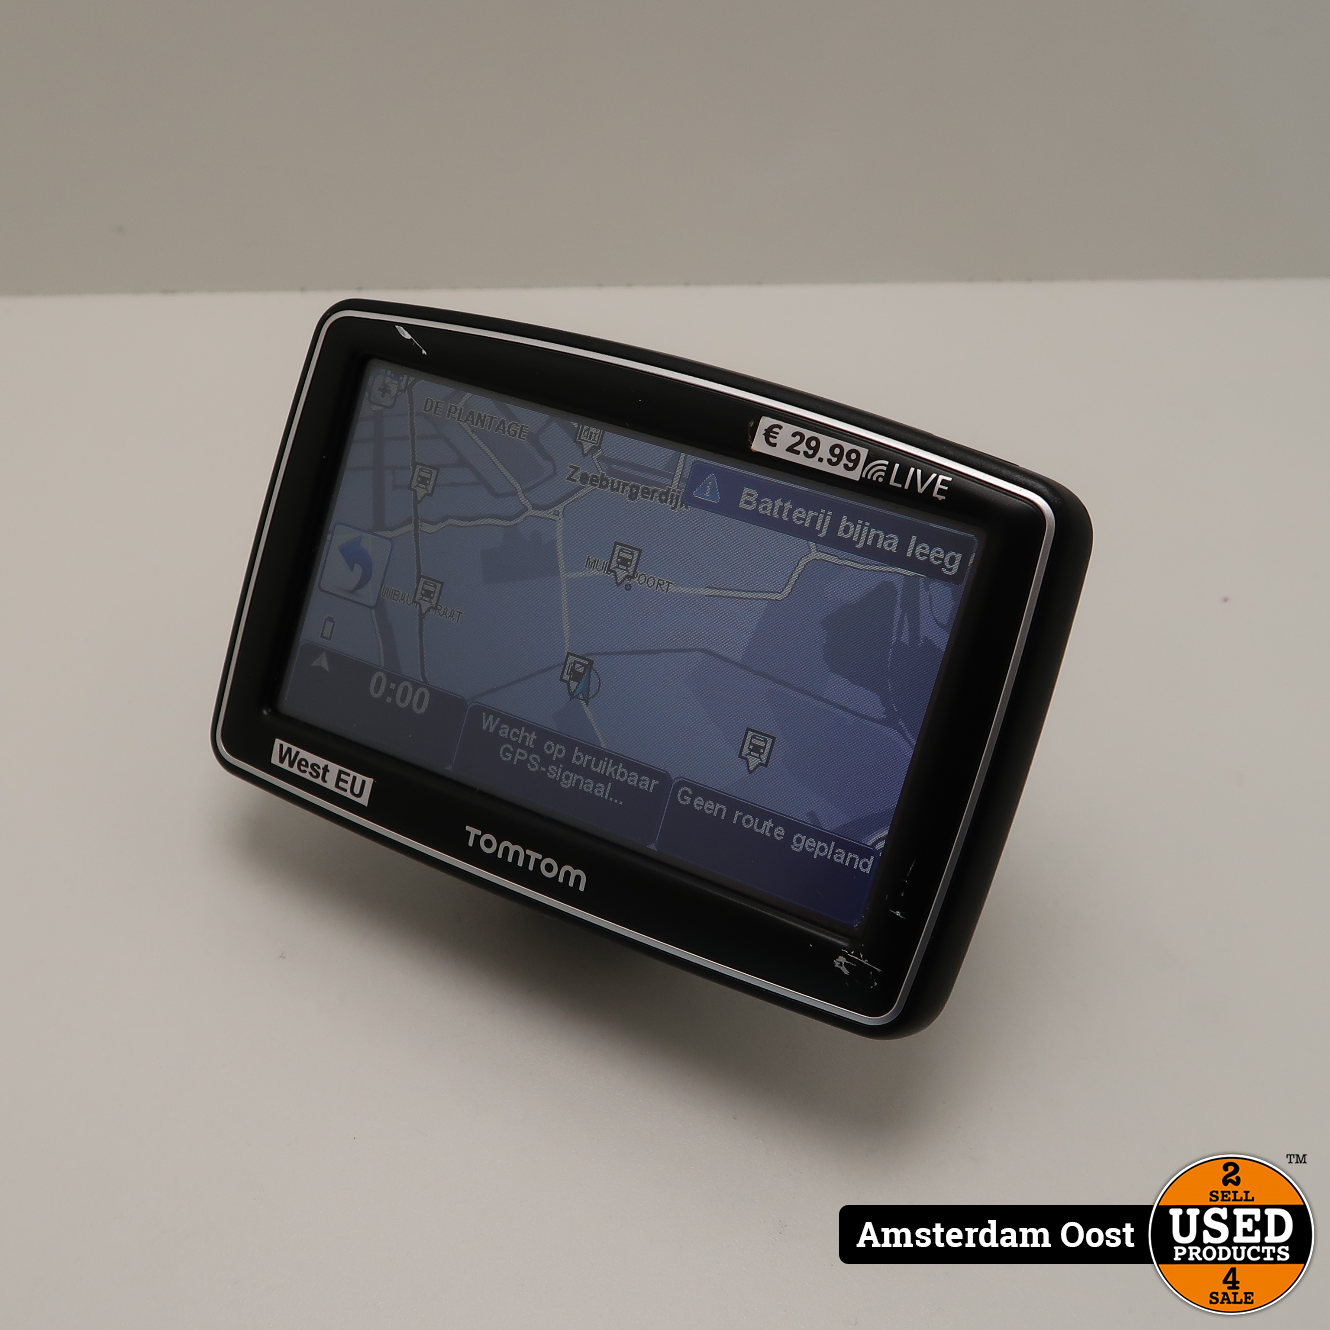 TomTom XL Live - West | in Gebruikte Staat - Used Products Amsterdam Oost